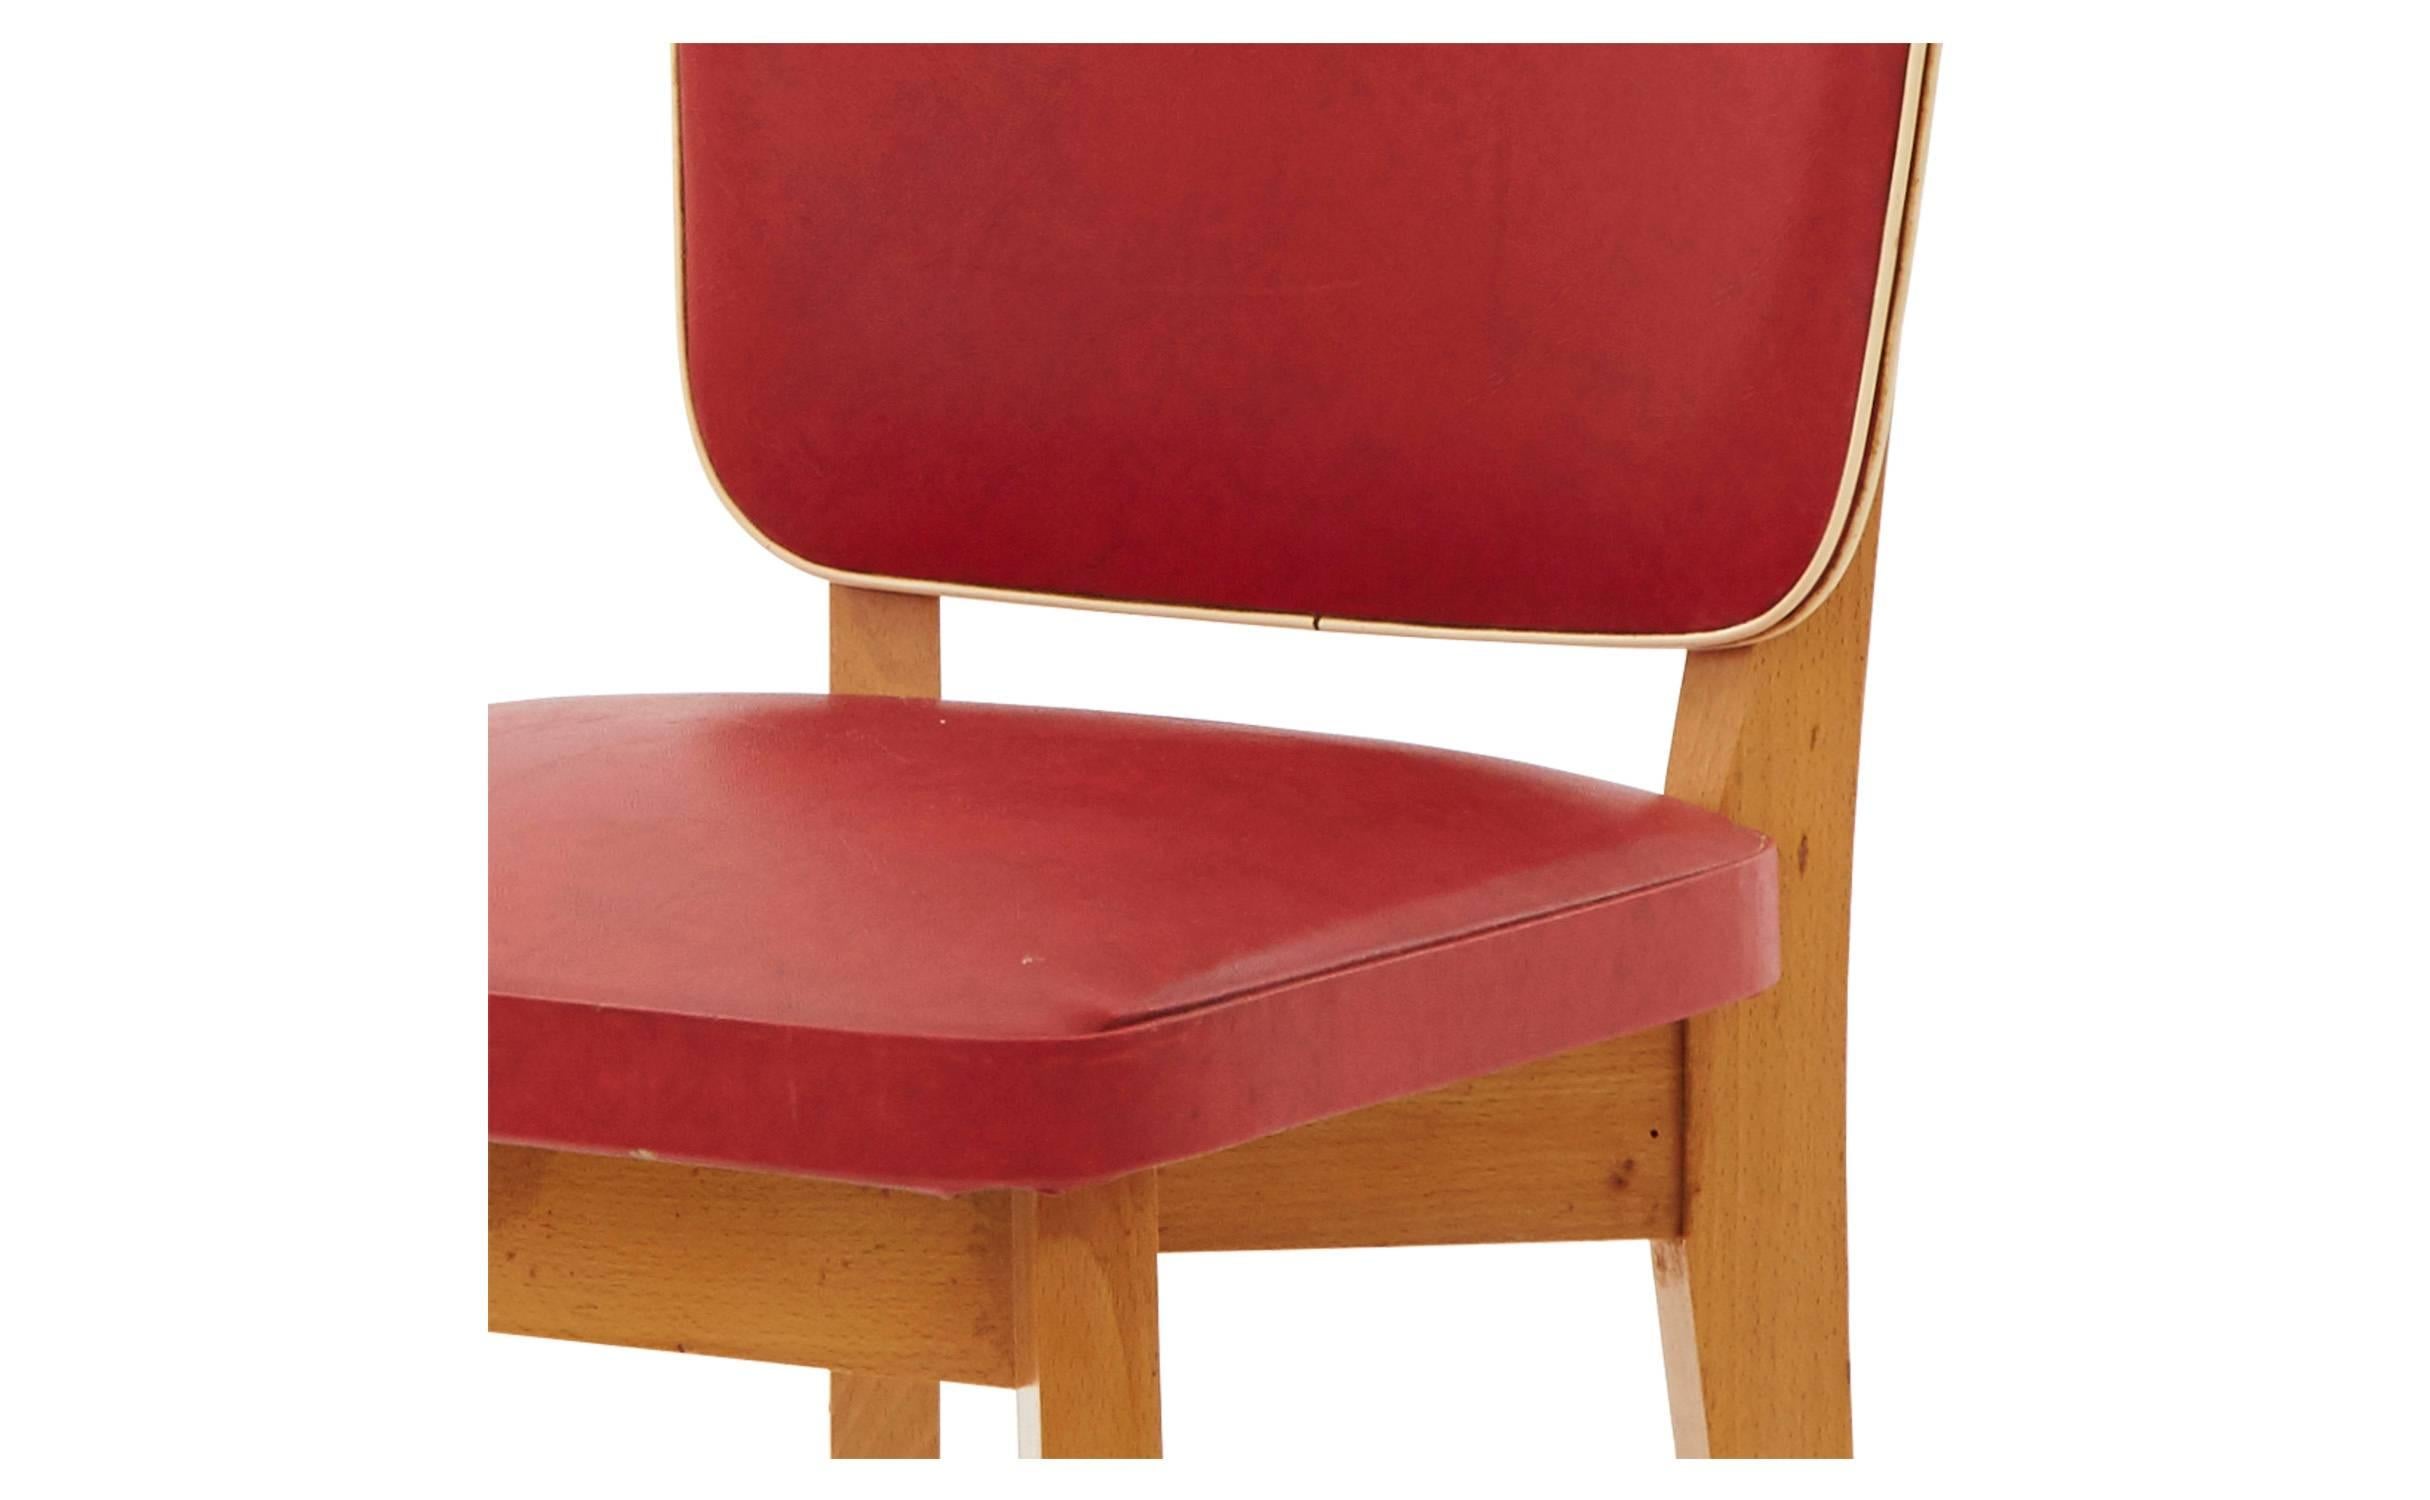 •Wooden frame with original red vinyl upholstery
•Mid-20th century
•From Spain

Dimensions
•overall: 15.5' D x 16' W x 35' H 
•seat height:18.5' H.